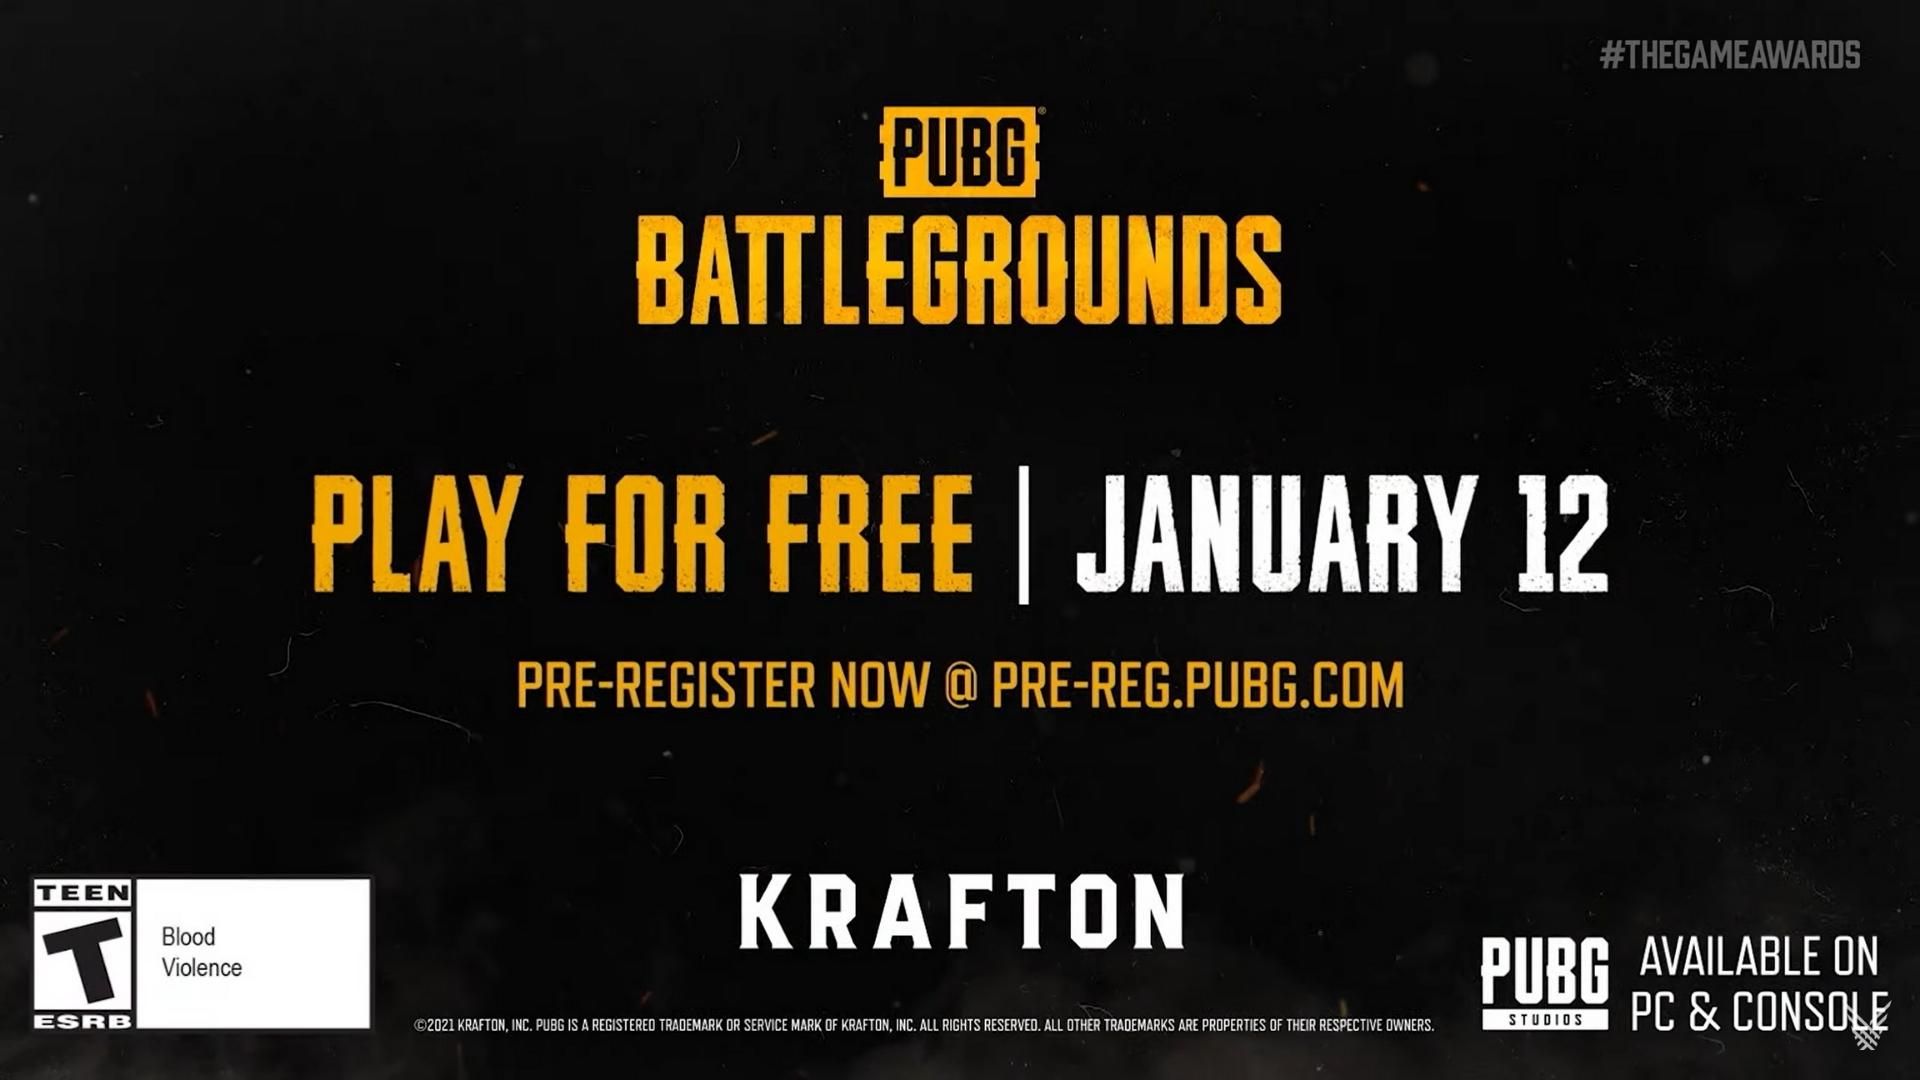 PUBG Battlegrounds is going free to play on January 12